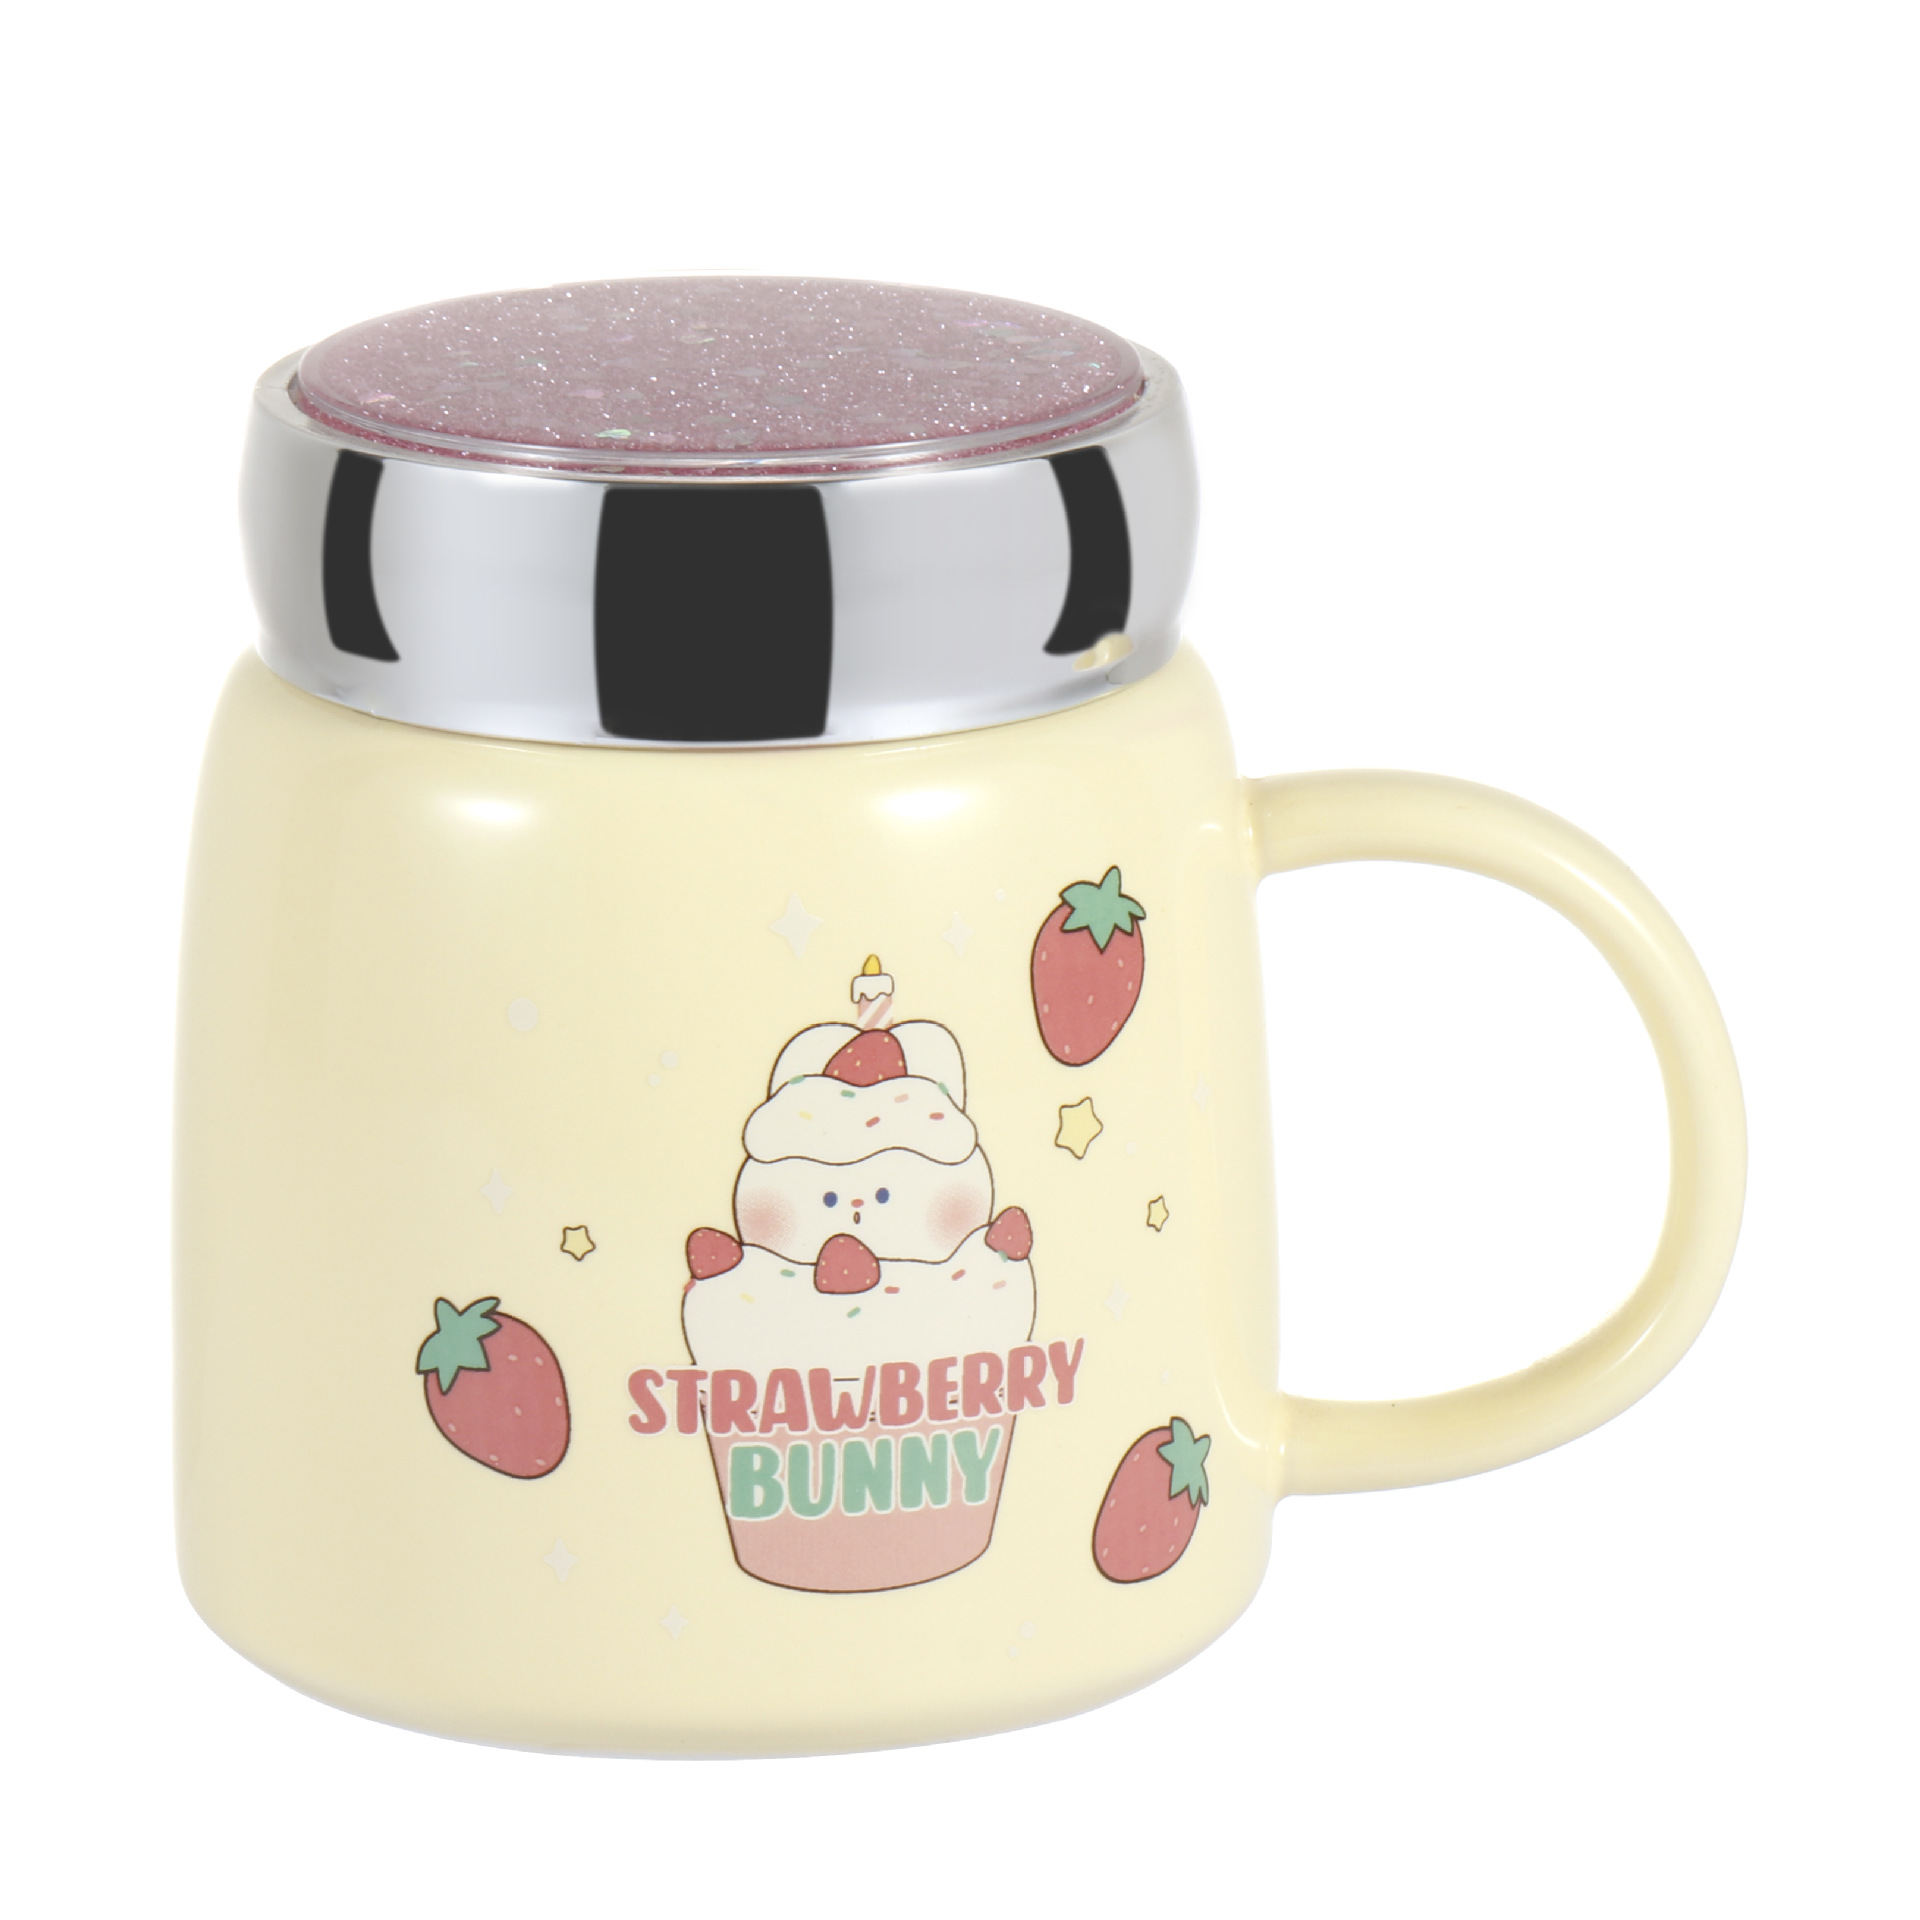 Water Cup Female Office Ceramic Cup Cute Super Cute Cup Creative Young Girl Personalized Mug with Cover Spoon Trend